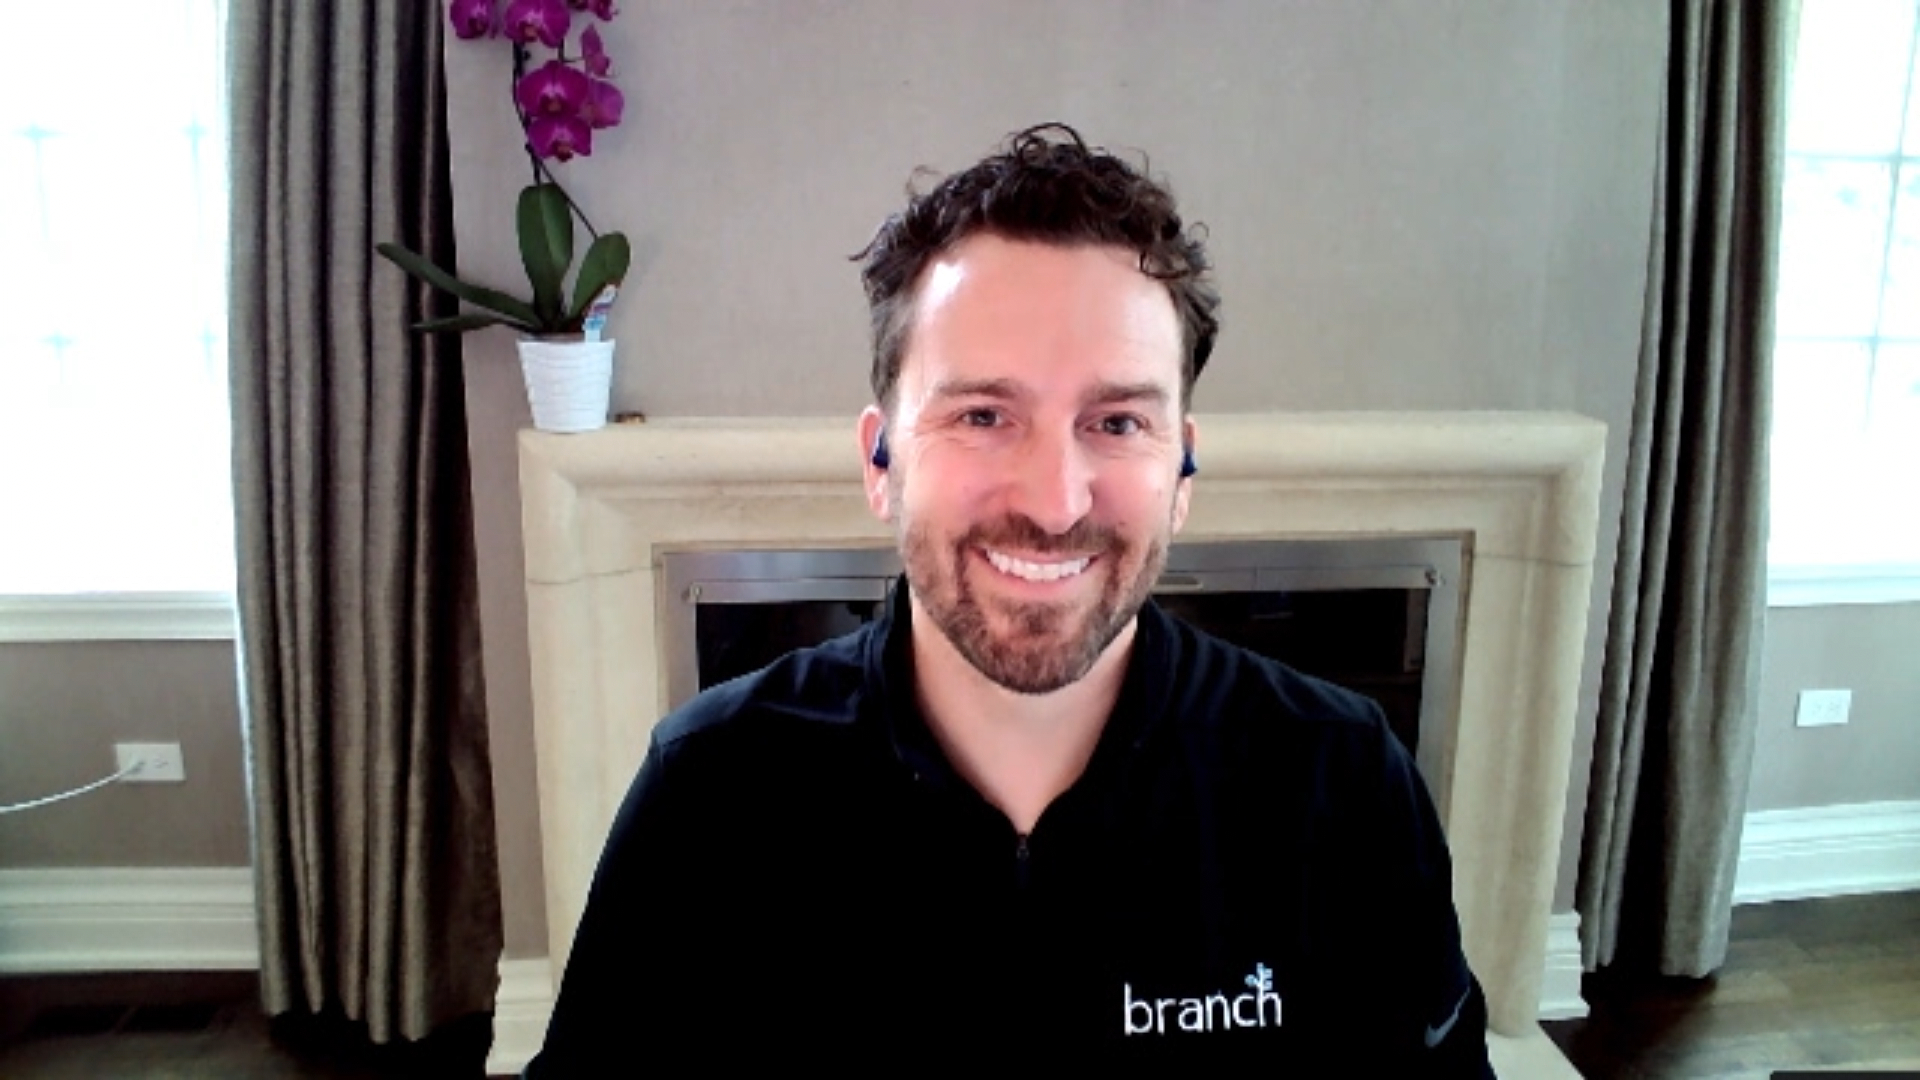 Branch provides linking technology and measurement tools in the age of digital marketing